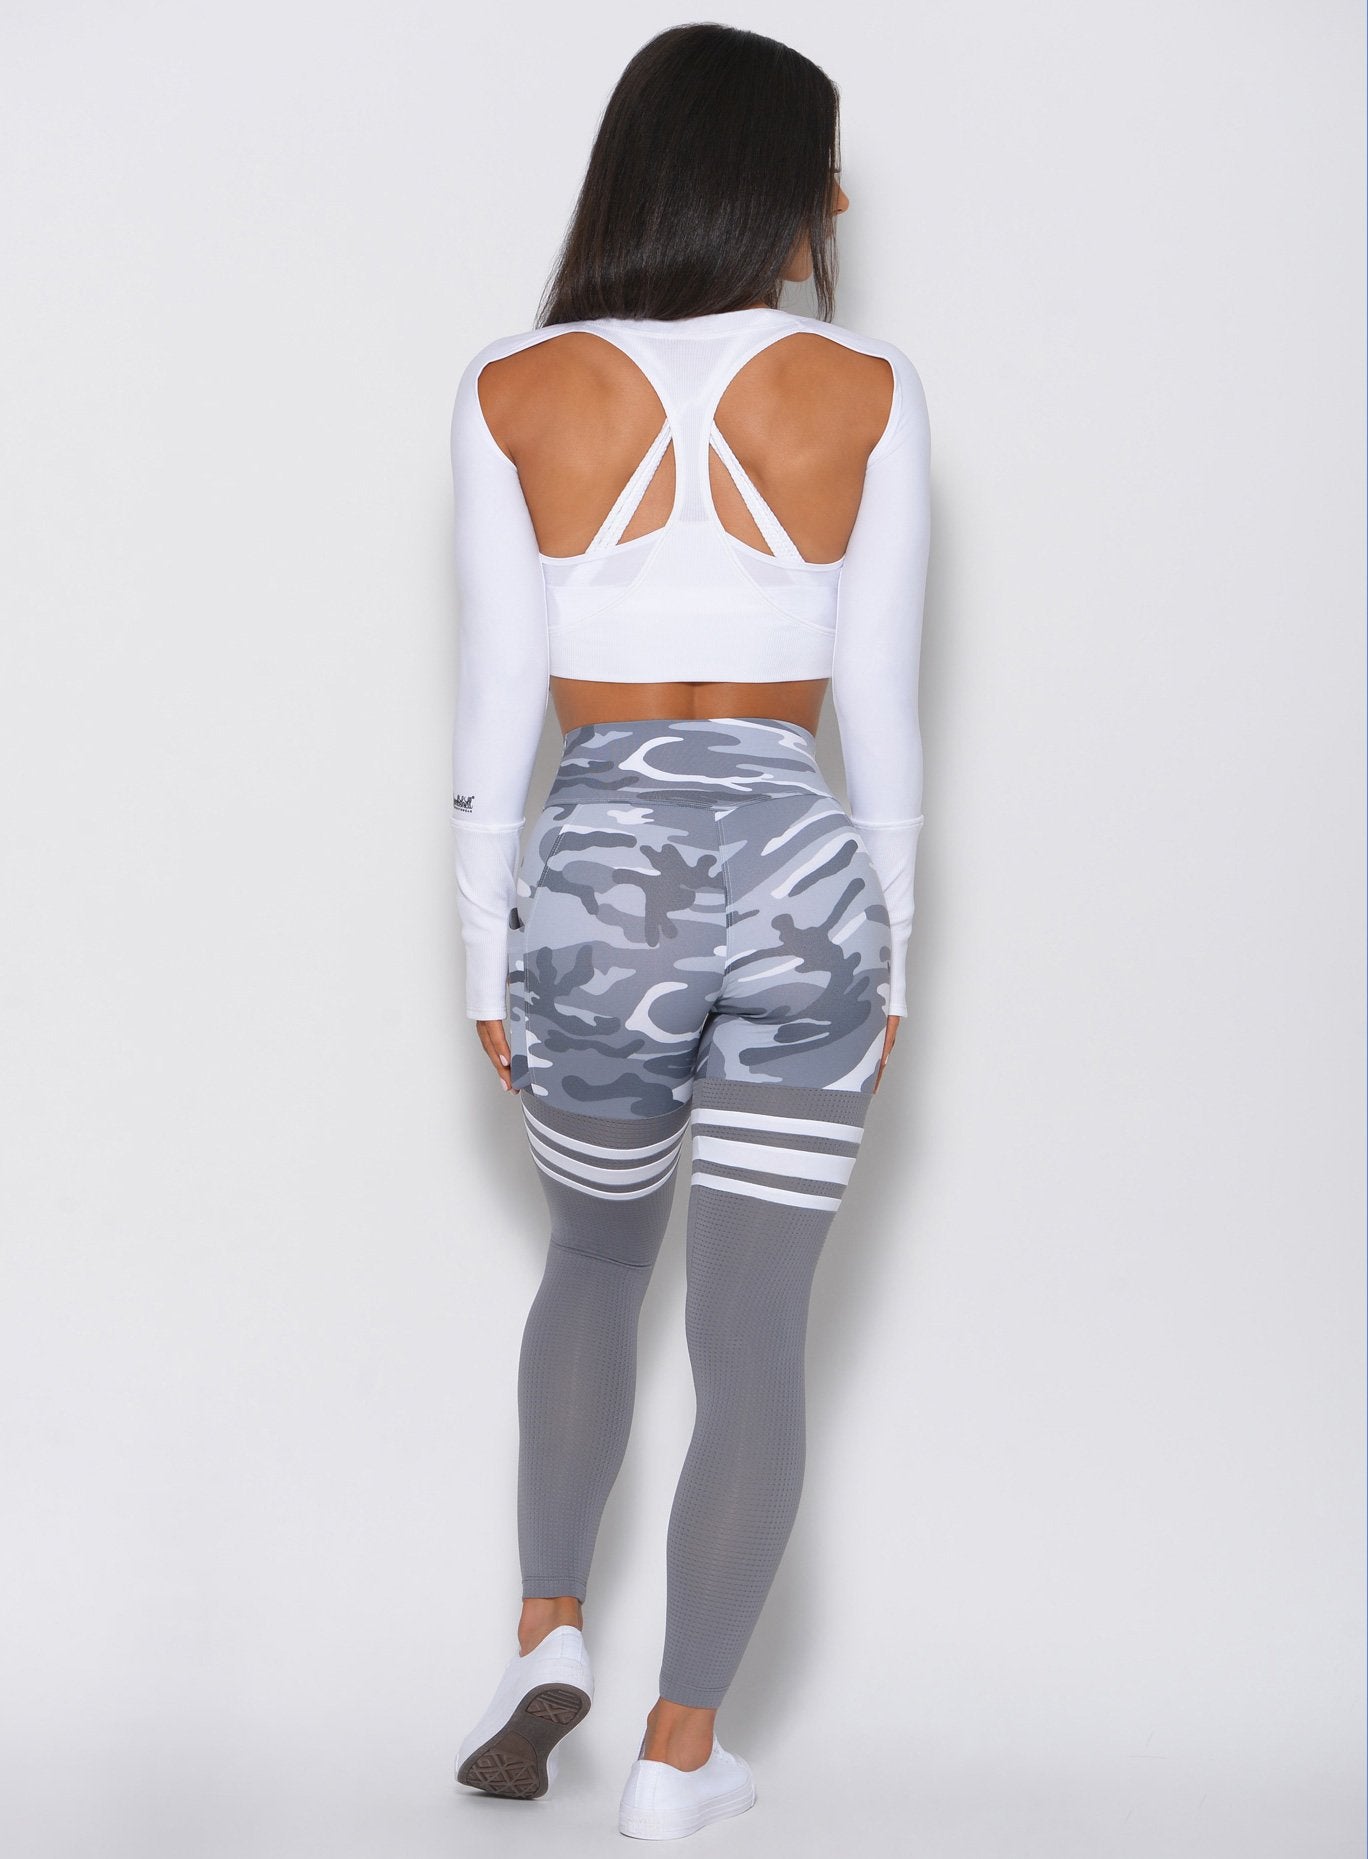 Back view of the model in the gray camo high waisted leggings with three white stripes on each side 